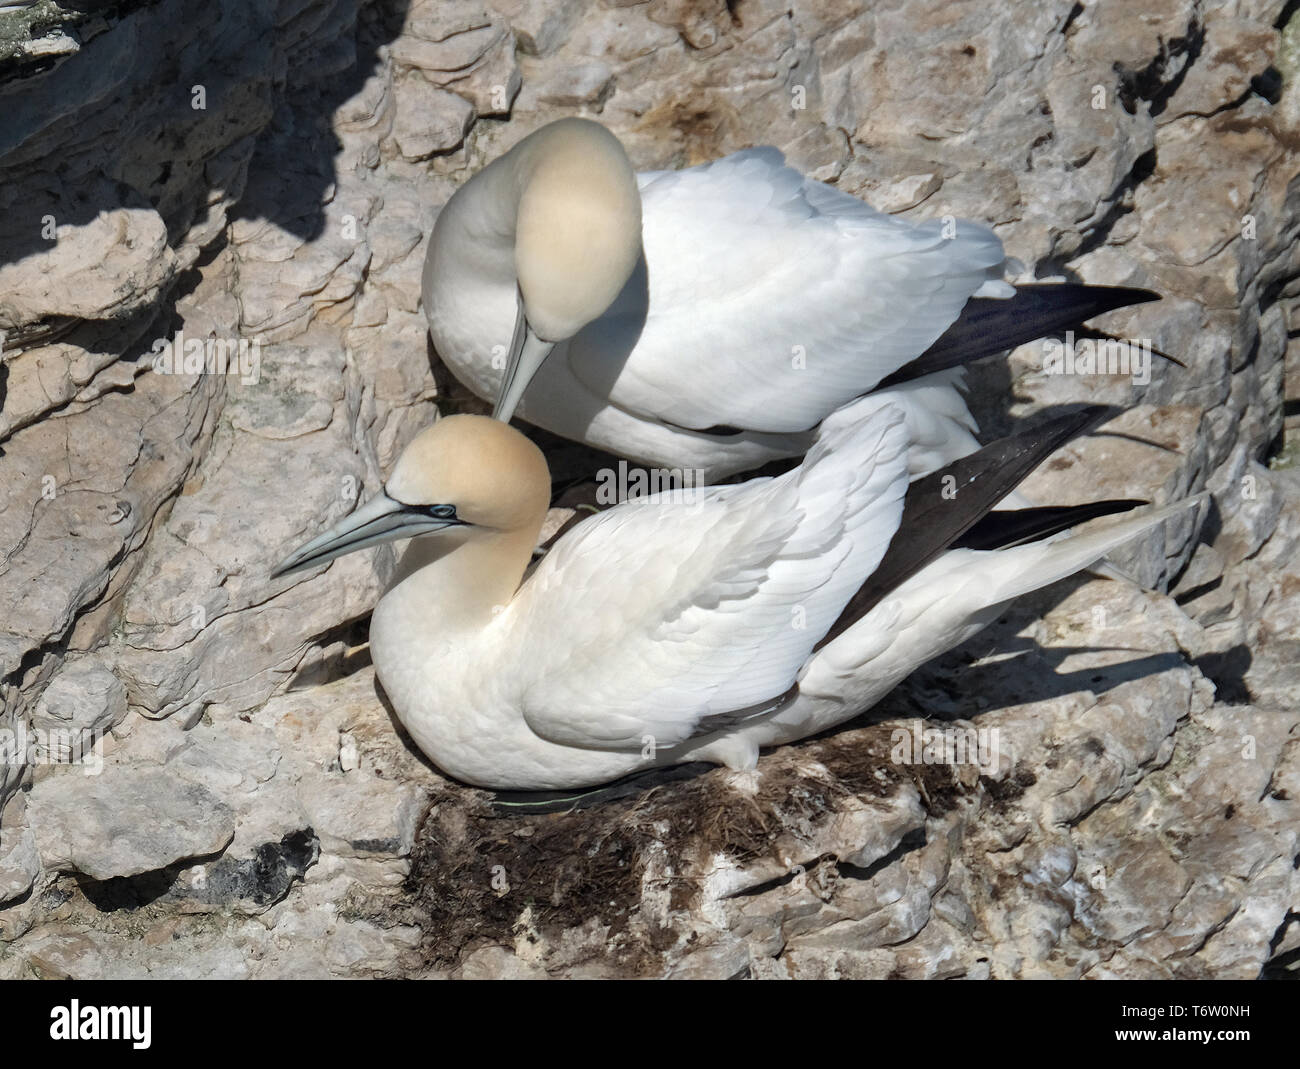 Gannets at the breeding colony on Bempton Cliffs in east Yorkshire, UK. Stock Photo